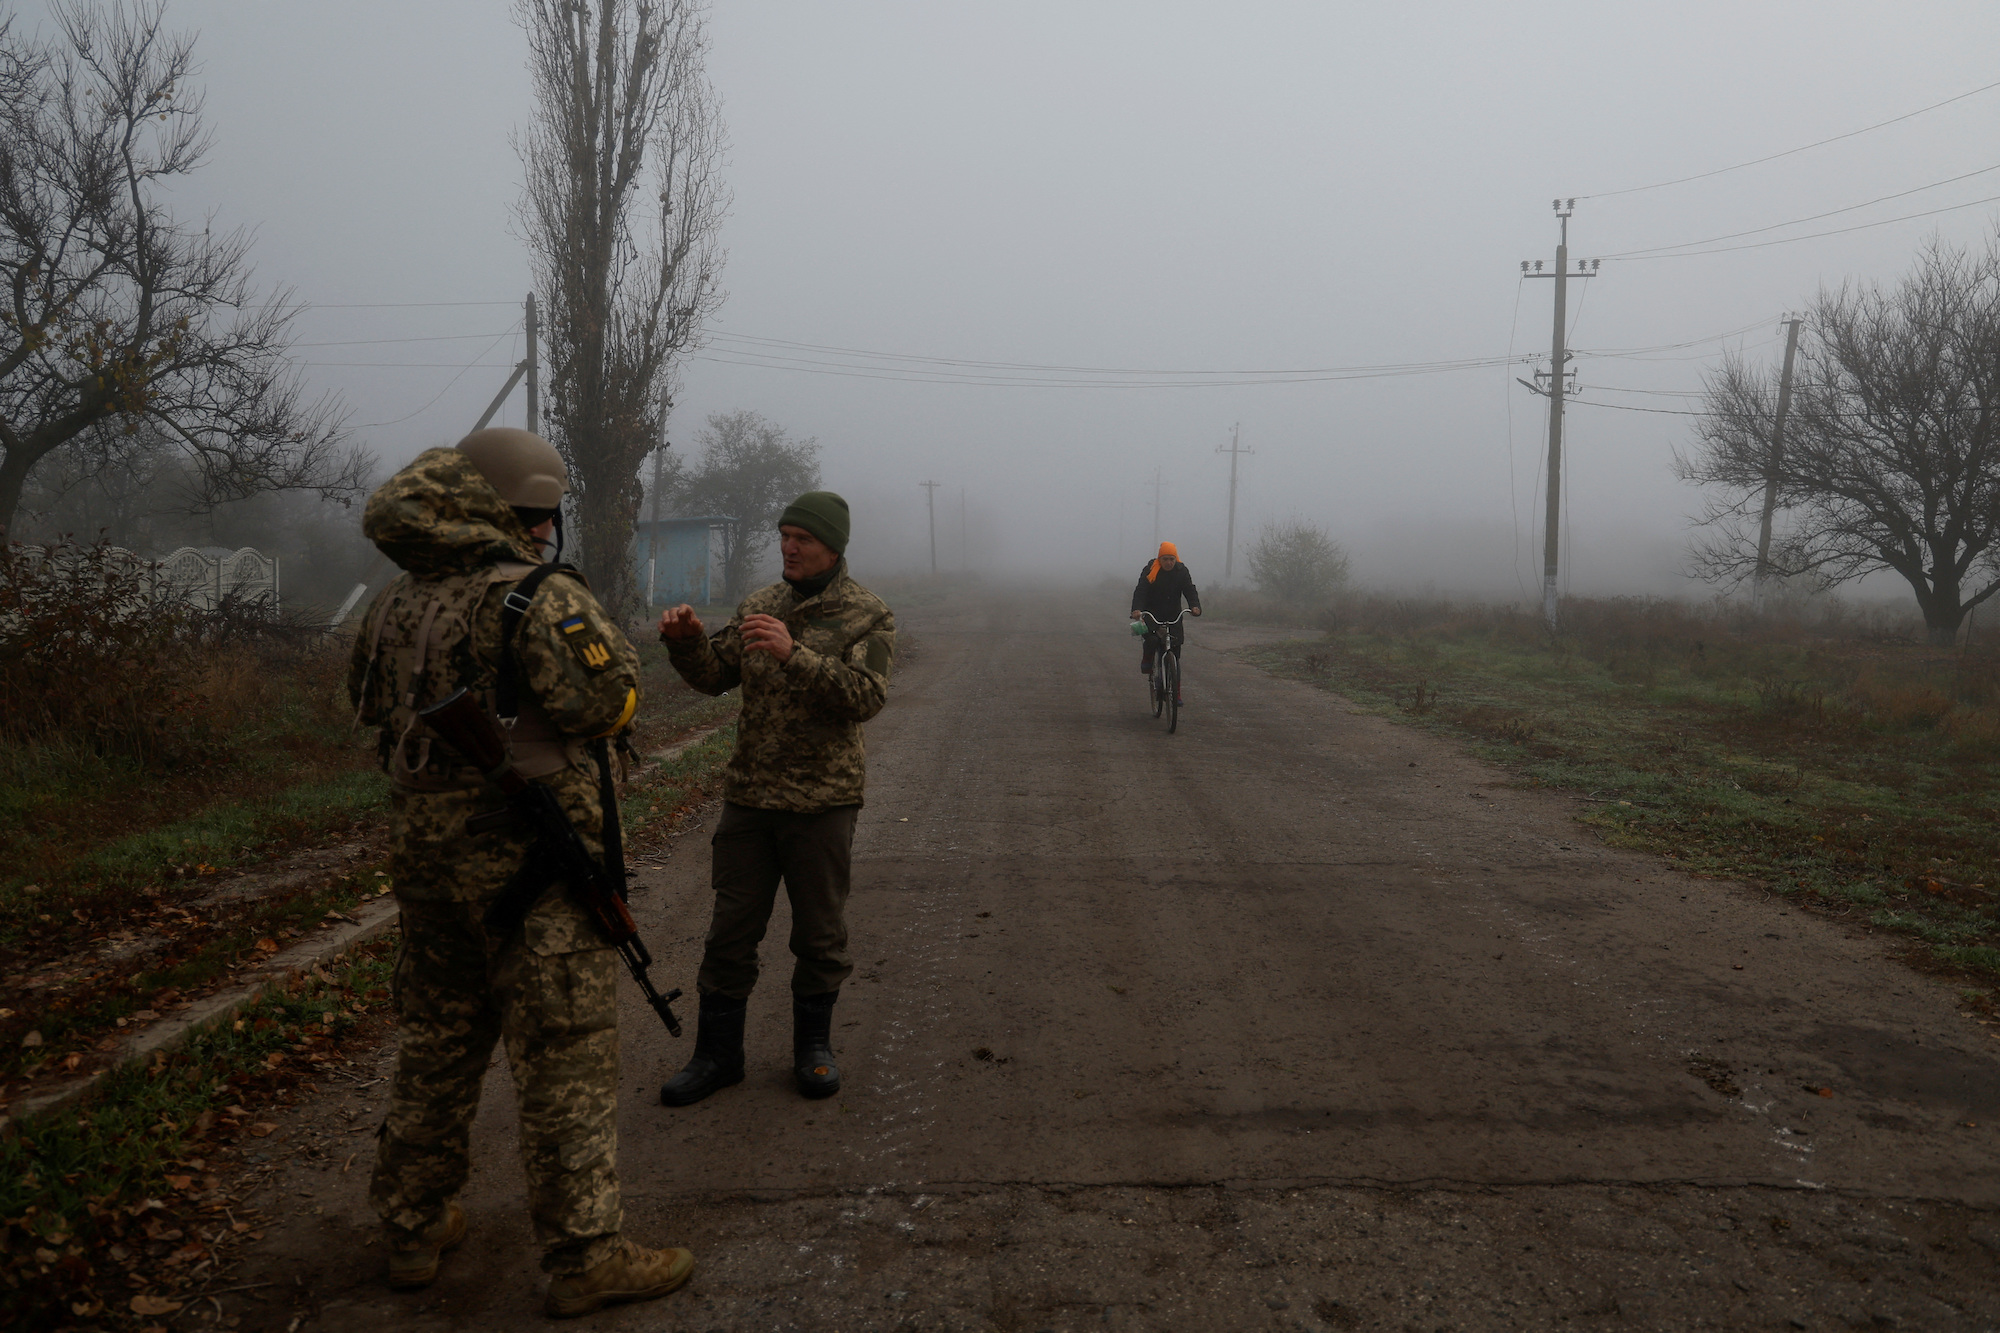 A Ukrainian serviceman speaks with a chaplain while a local resident rides a bicycle along a street, in a village near the newly recaptured city of Snihurivka, Mykolaiv region, on Thursday.